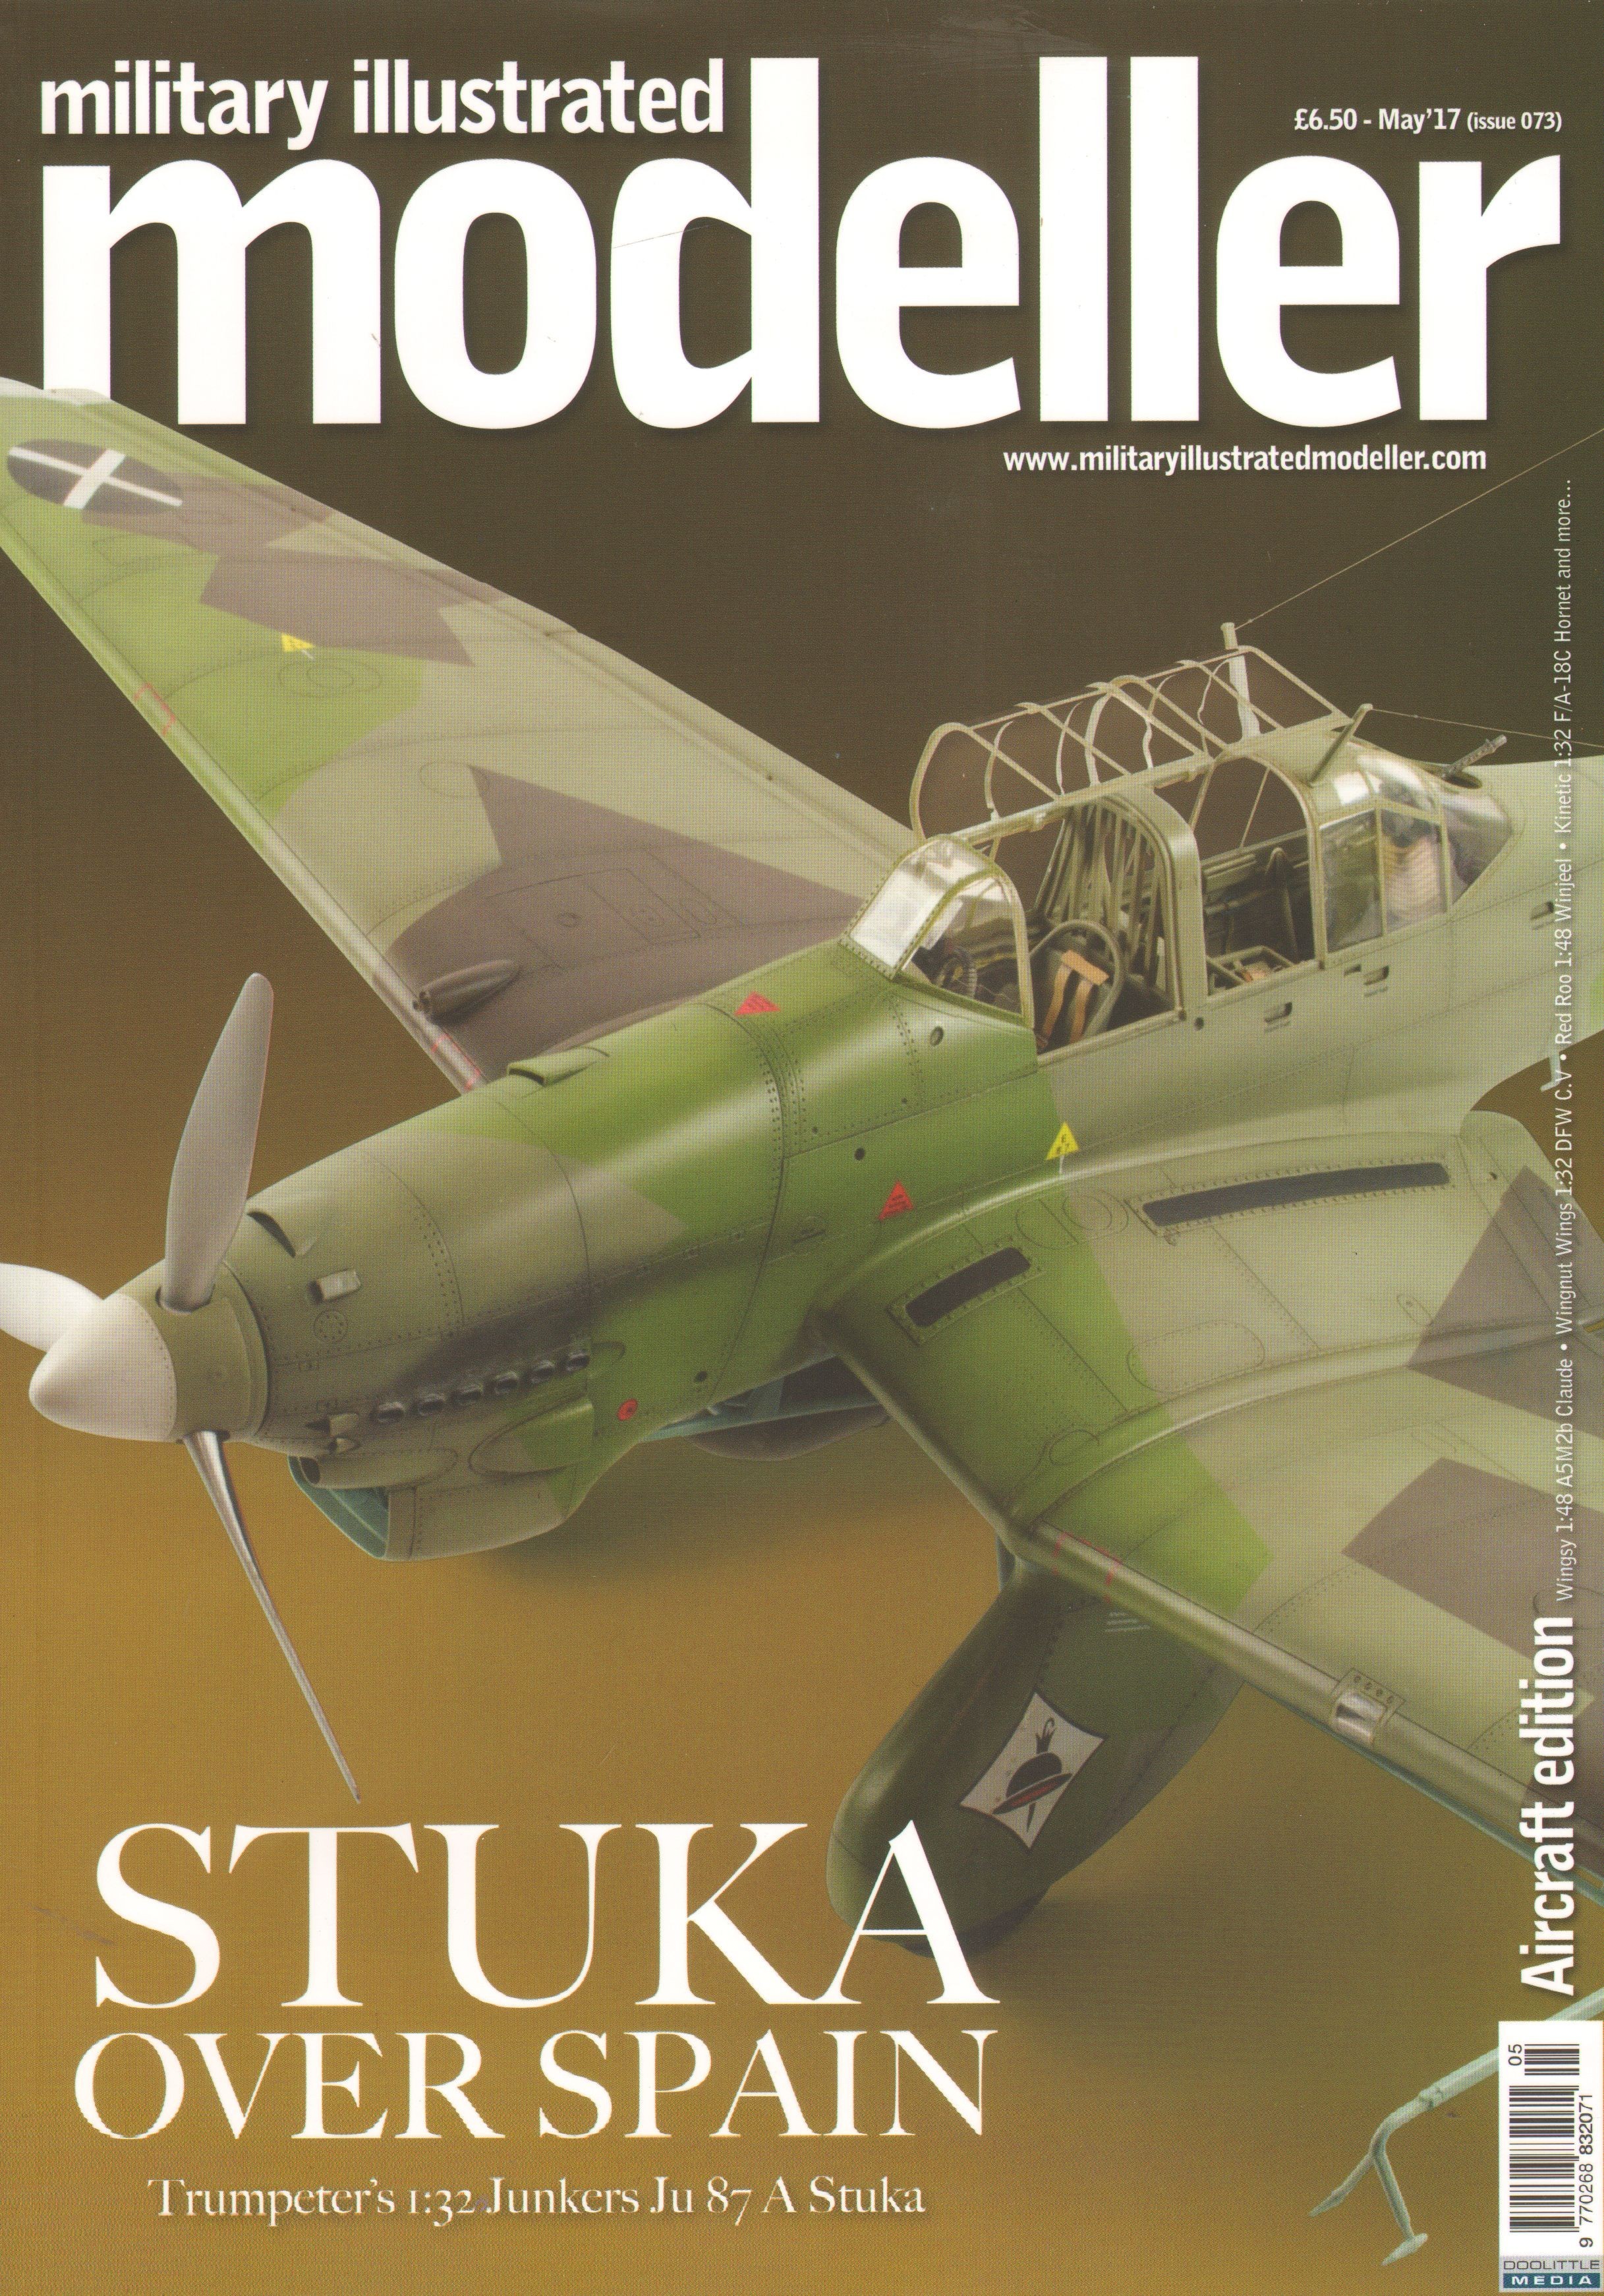 Magazines - Military Illustrated Modeller (numéro 73) May '17 (Aircraf